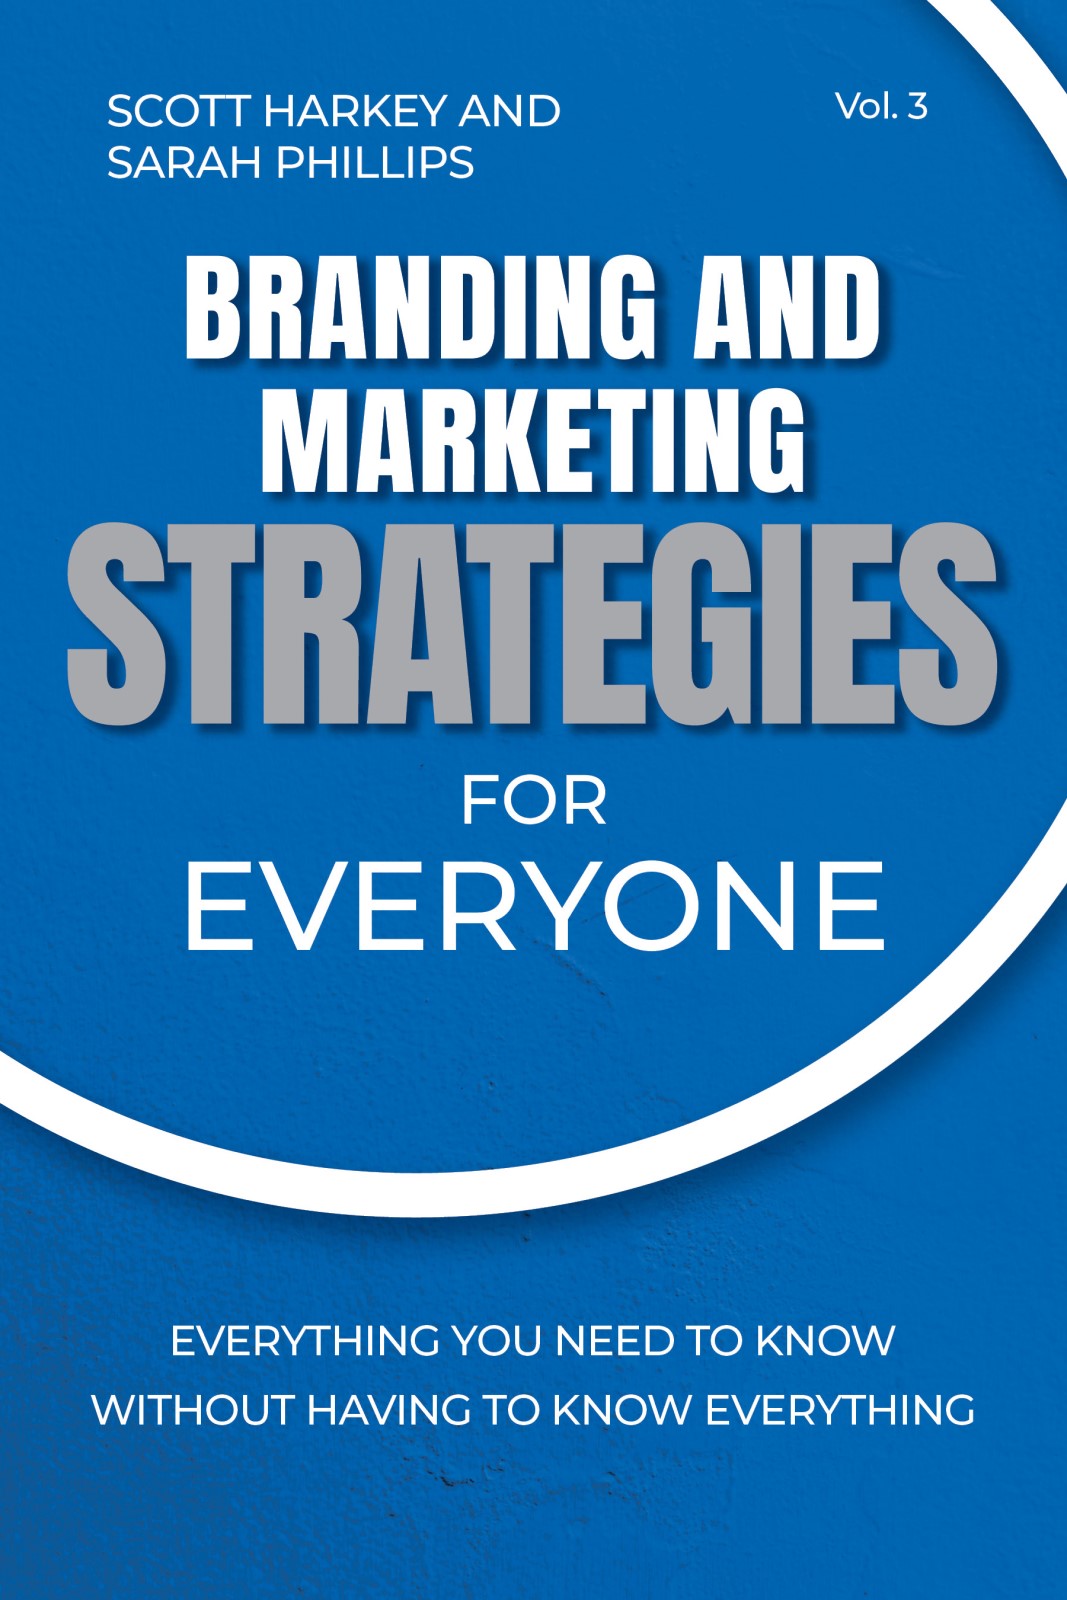 https://kenmcelroy.com/wp-content/uploads/2024/03/Branding-and-Marketing-Strategies-for-Everyone.jpg